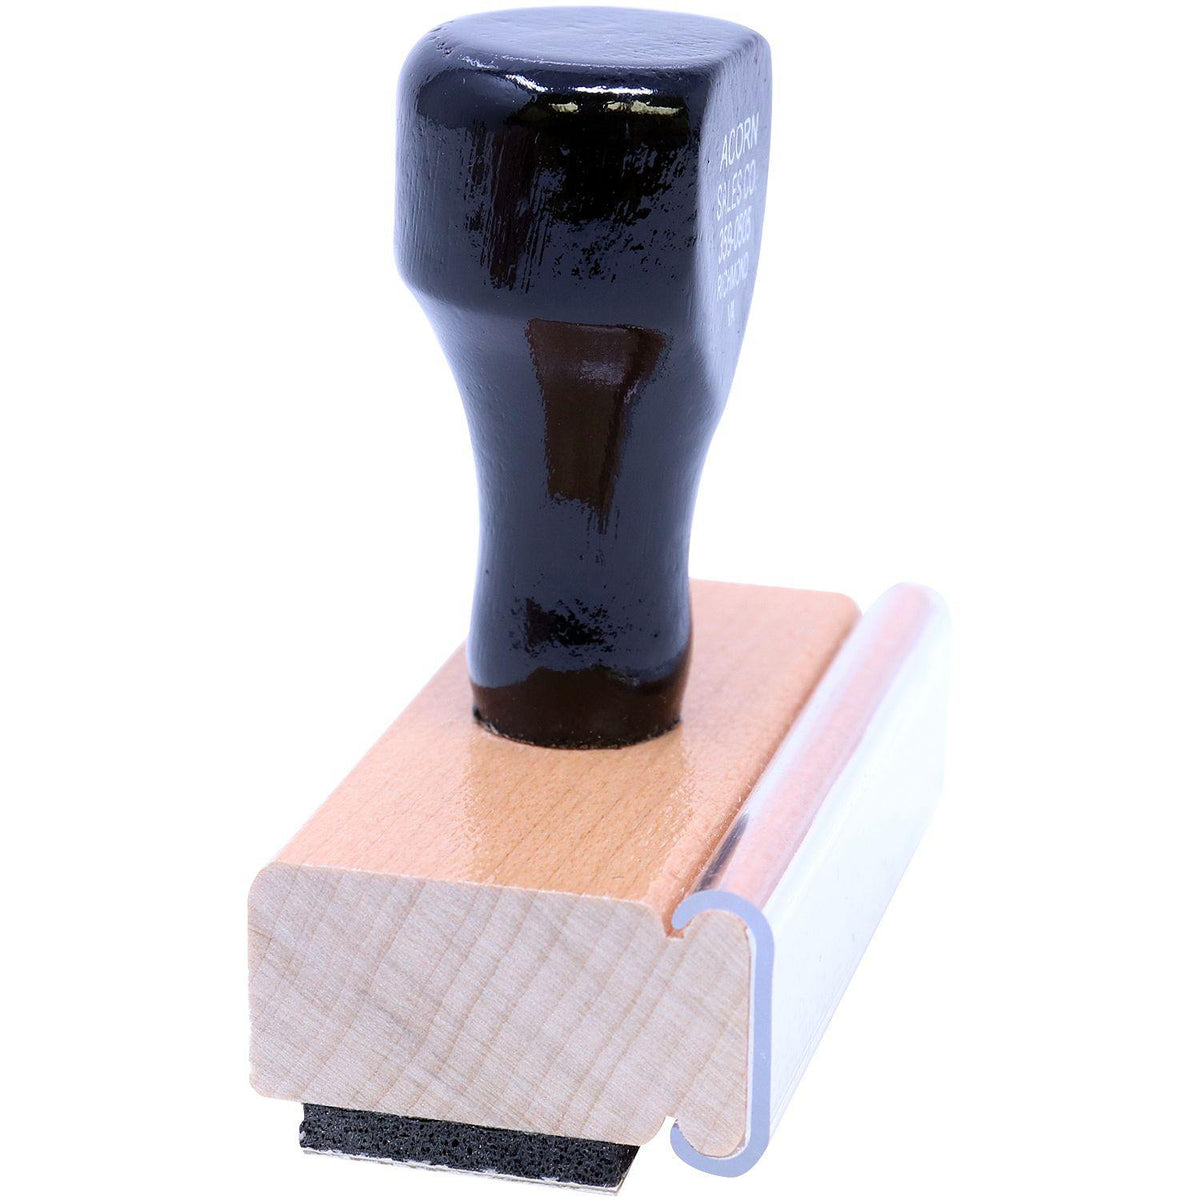 Narrow Font Final Notice Rubber Stamp - Engineer Seal Stamps - Brand_Acorn, Impression Size_Small, Stamp Type_Regular Stamp, Type of Use_Business, Type of Use_Finance